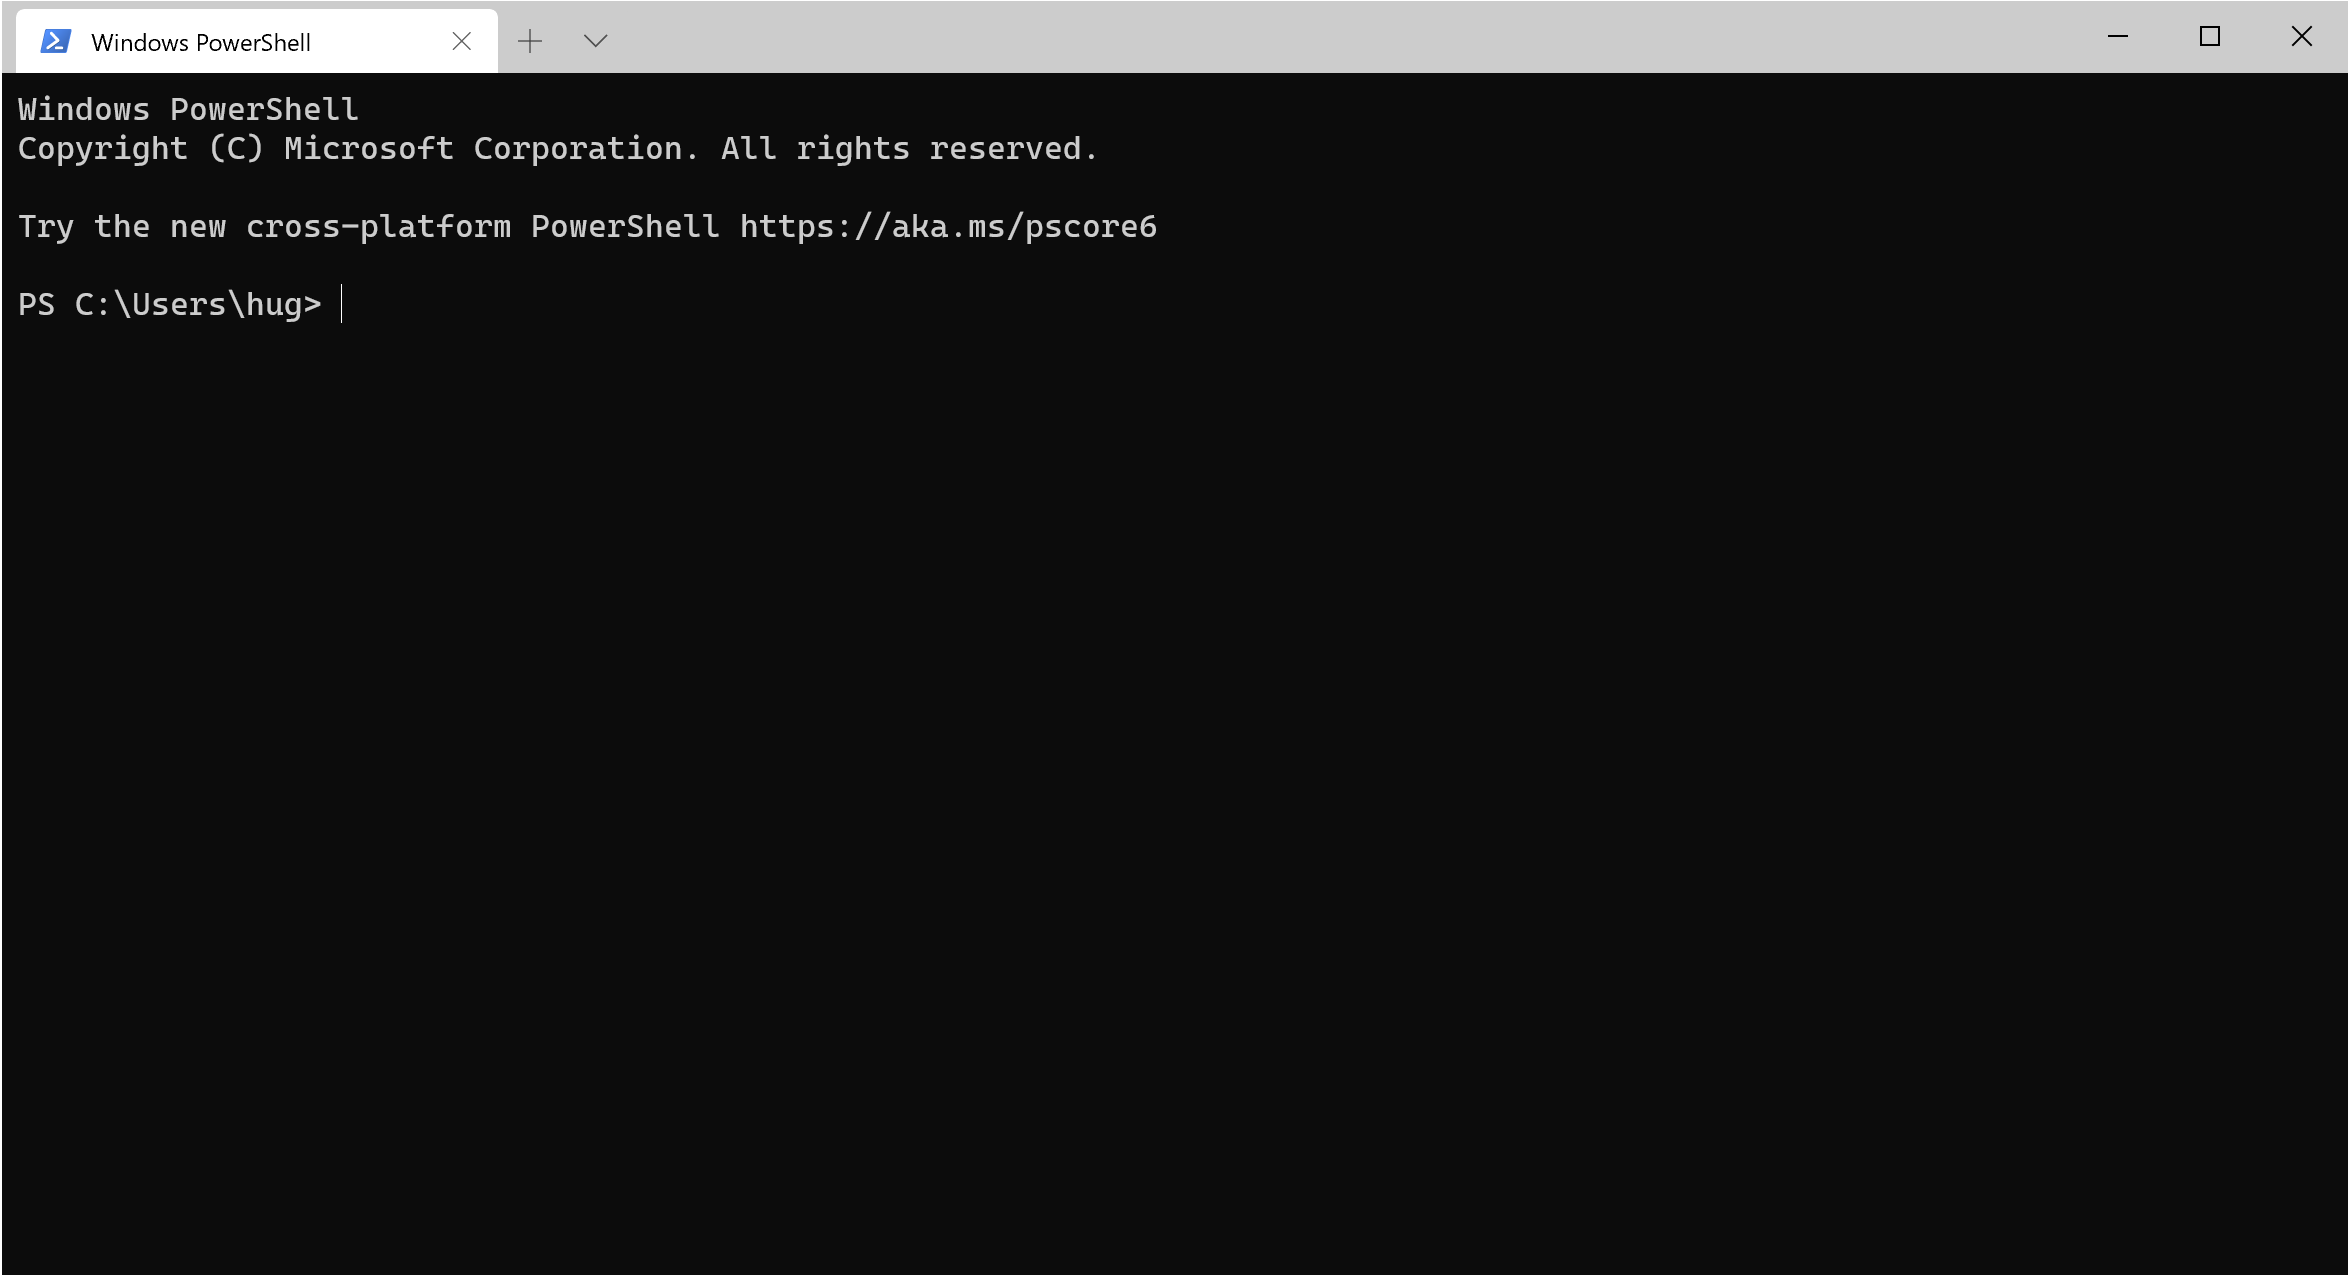 install windows terminal from github instructions